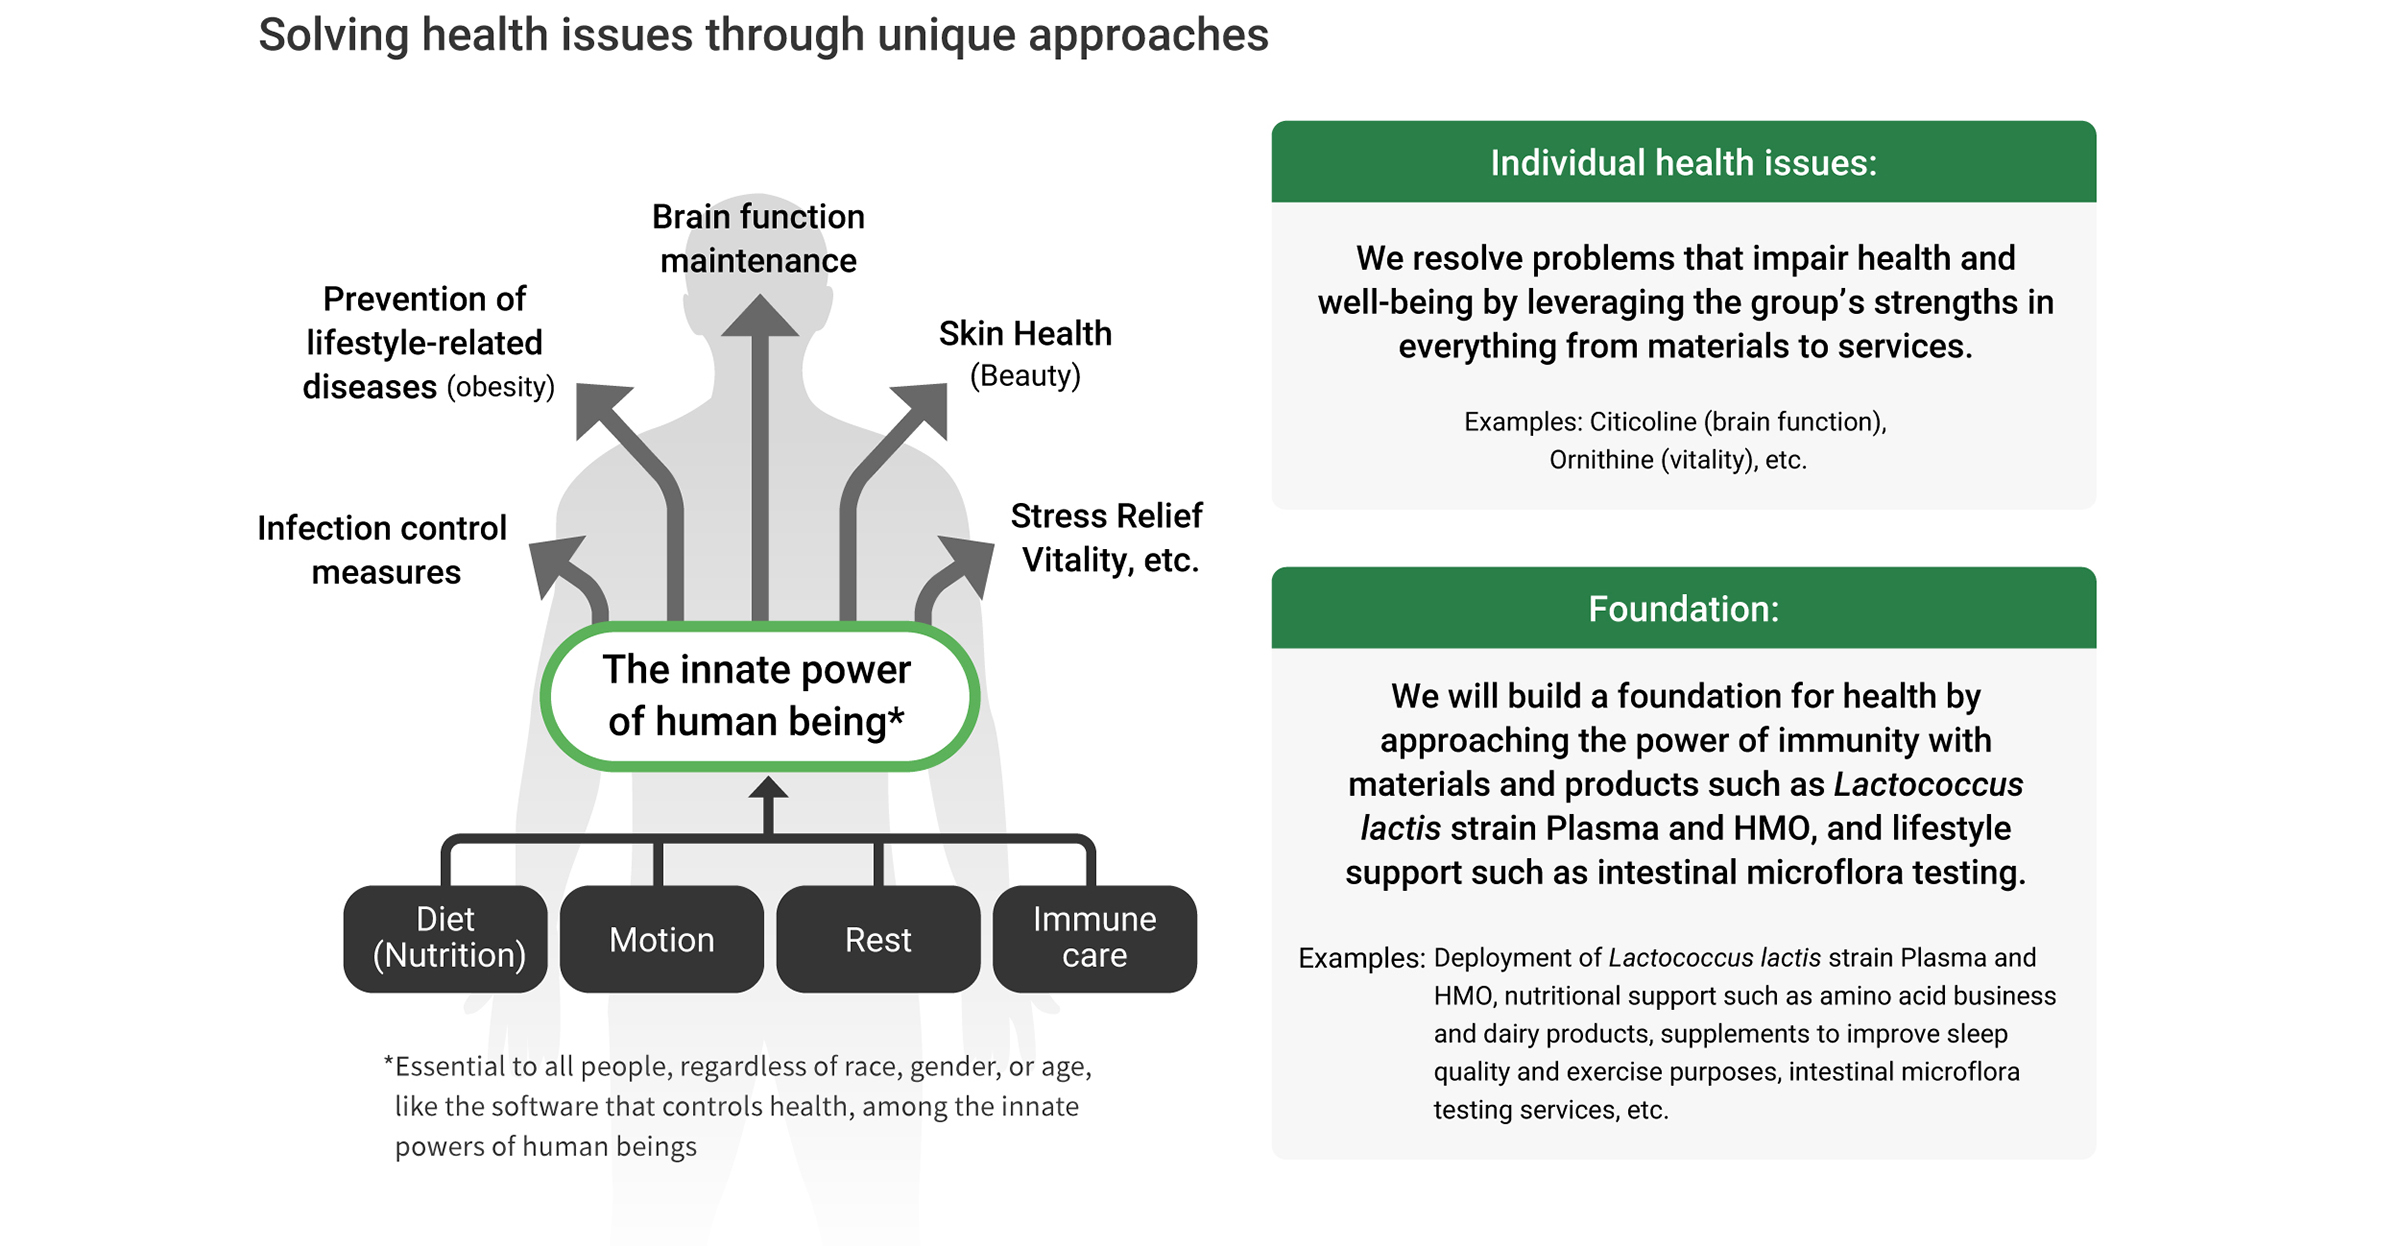 Figure: SoIving health issues through unique approaches